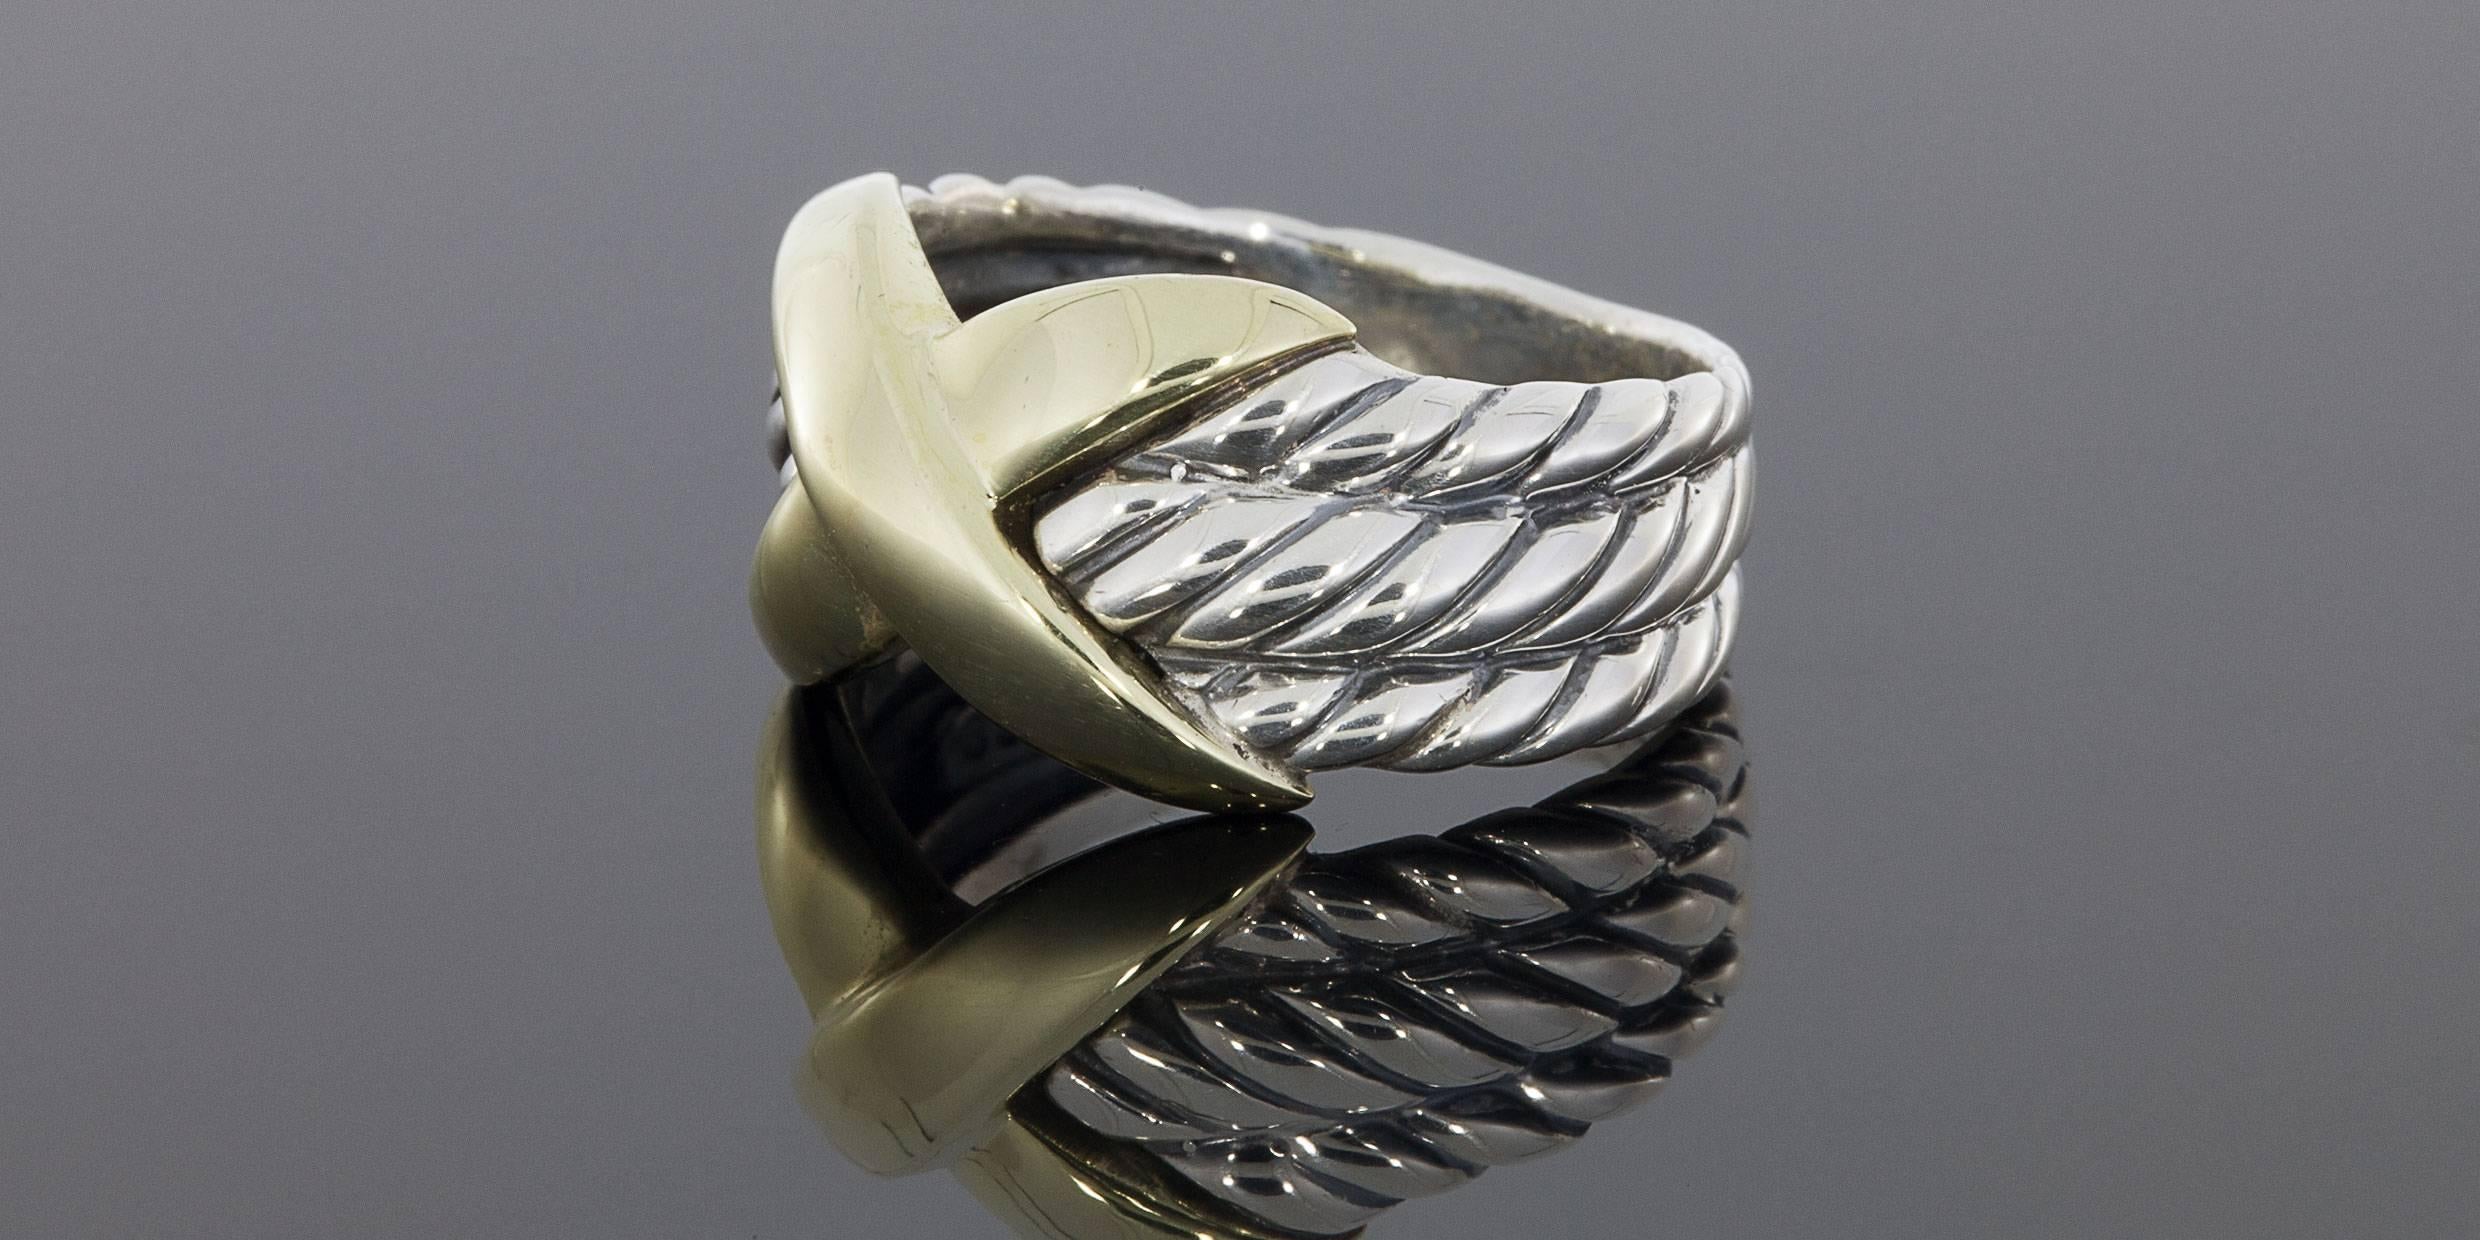 David Yurman's cable style jewelry has become his signature, the unifying element of every collection. This beautiful David Yurman ring is from the Crossover Collection & features this signature cable design. David Yurman has created a unique &